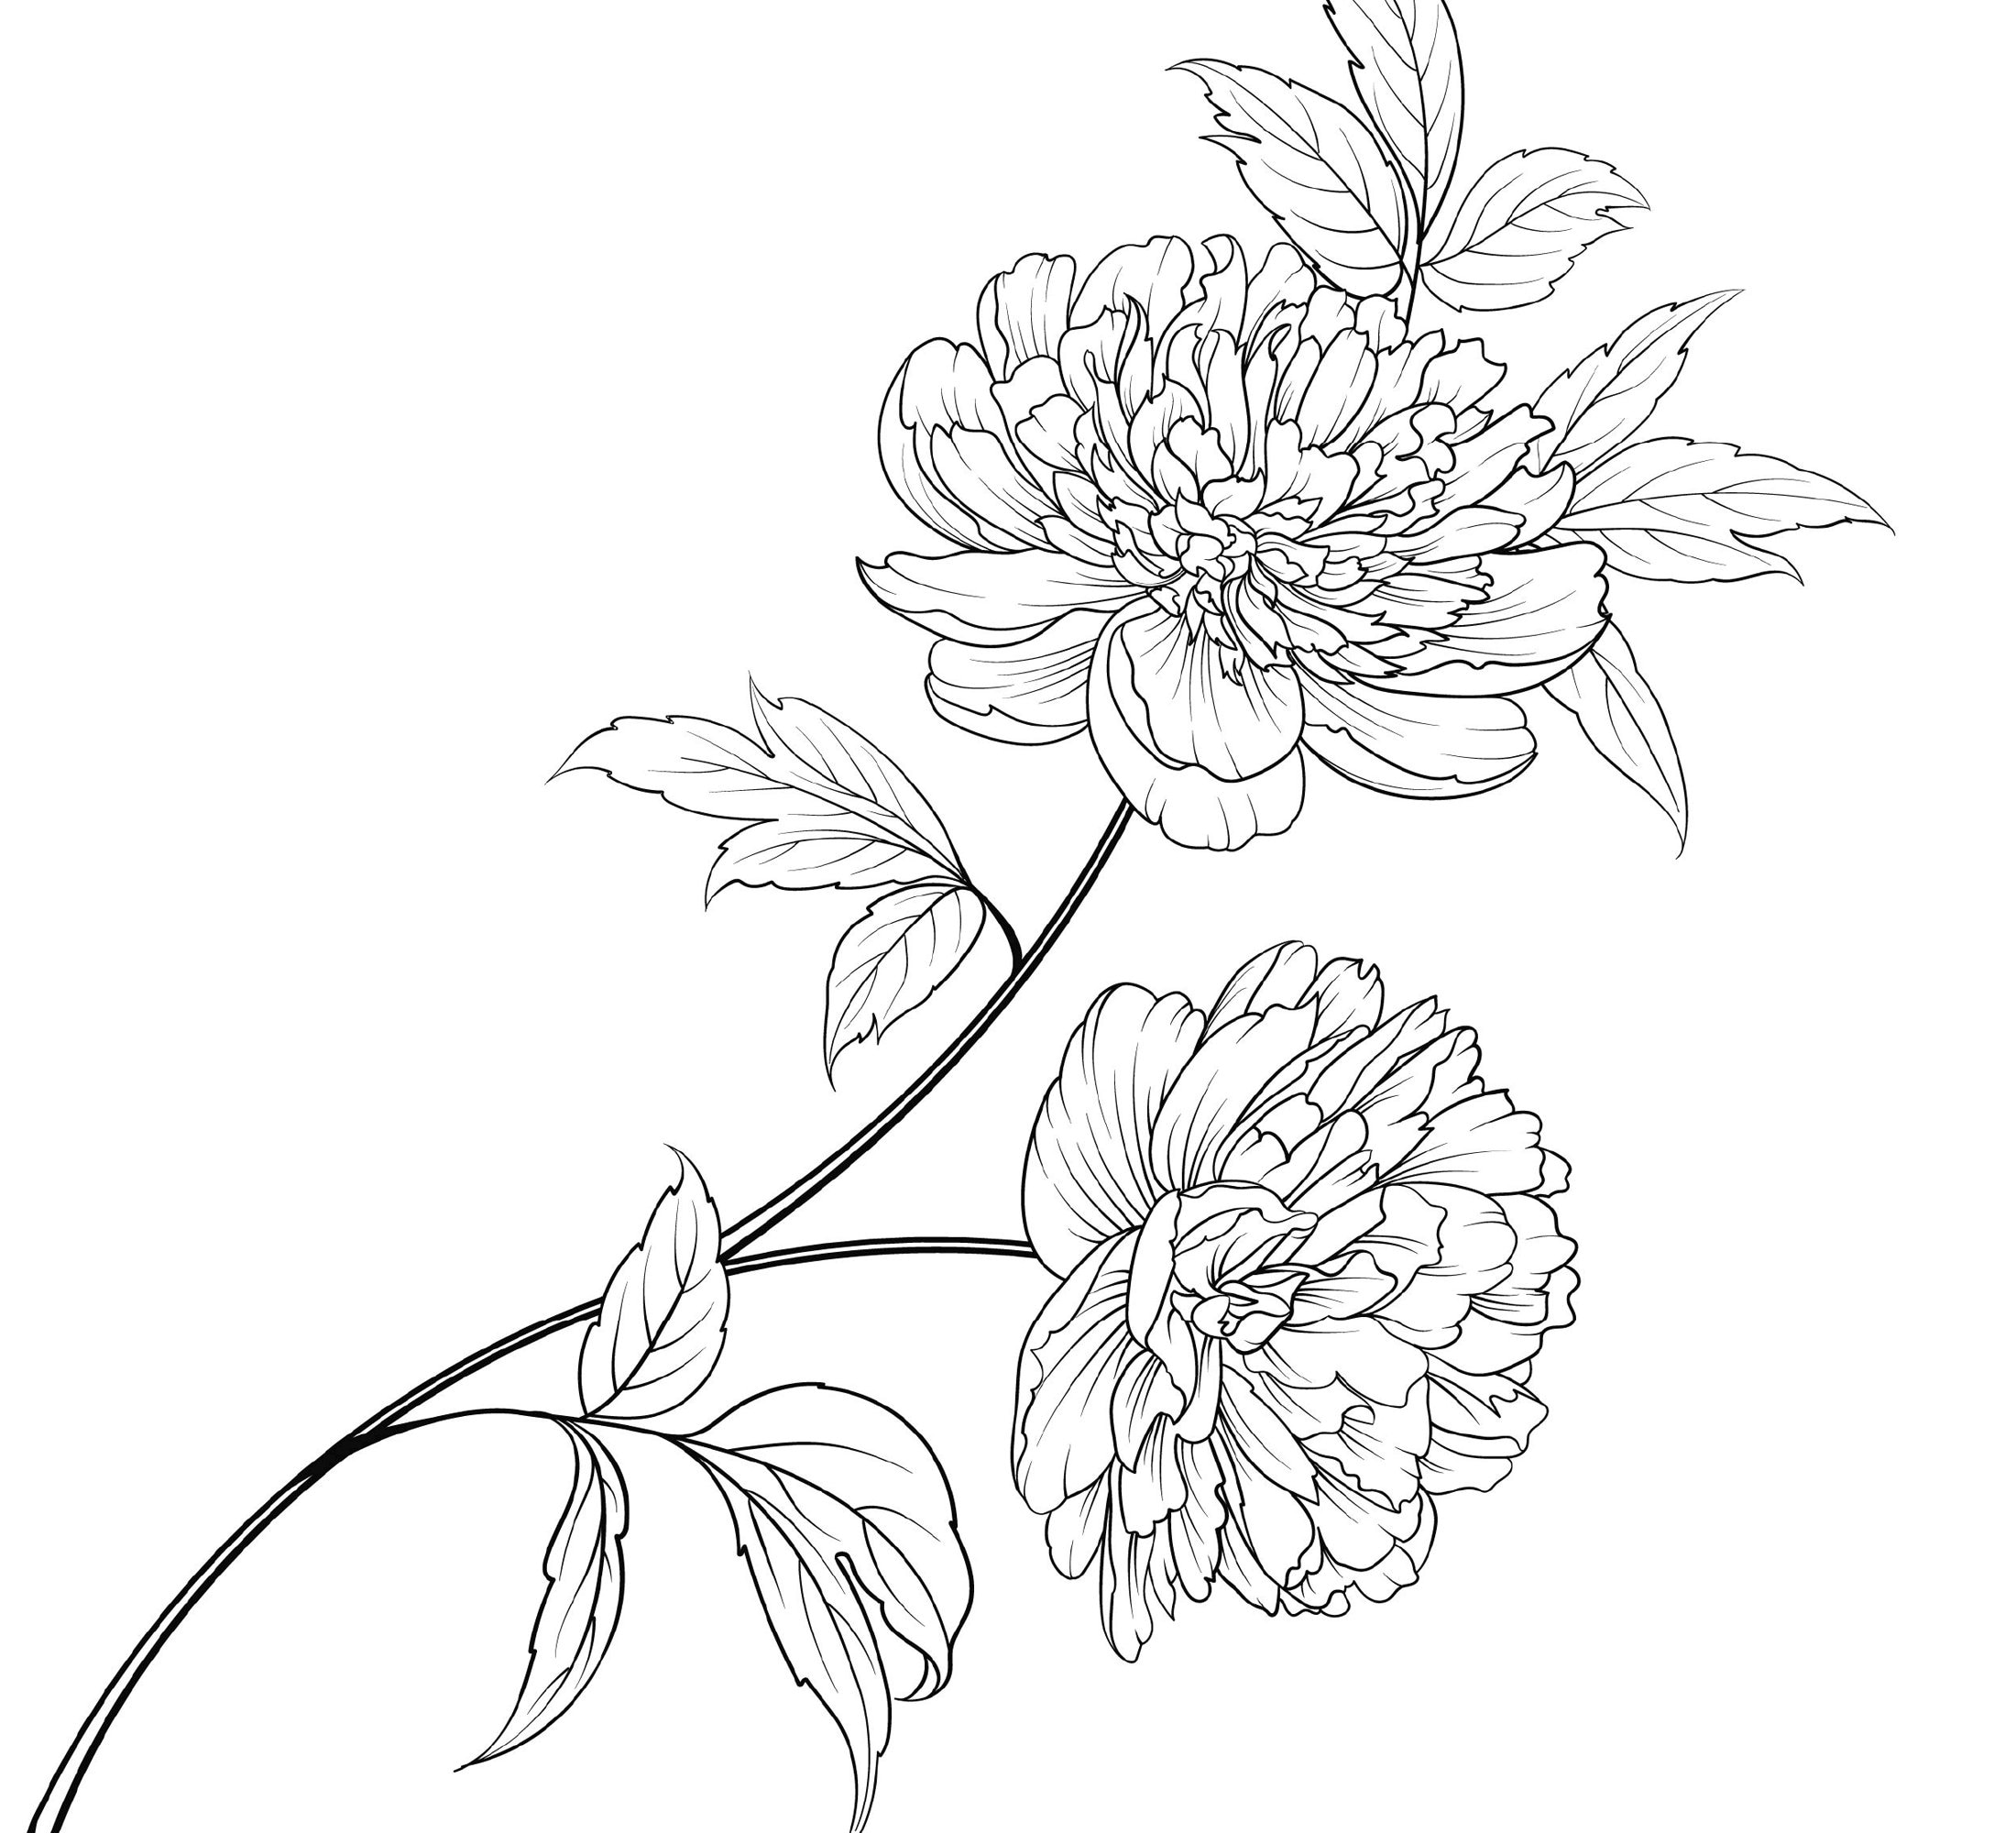 Peony flower coloring page peony flower coloring page for adults download now